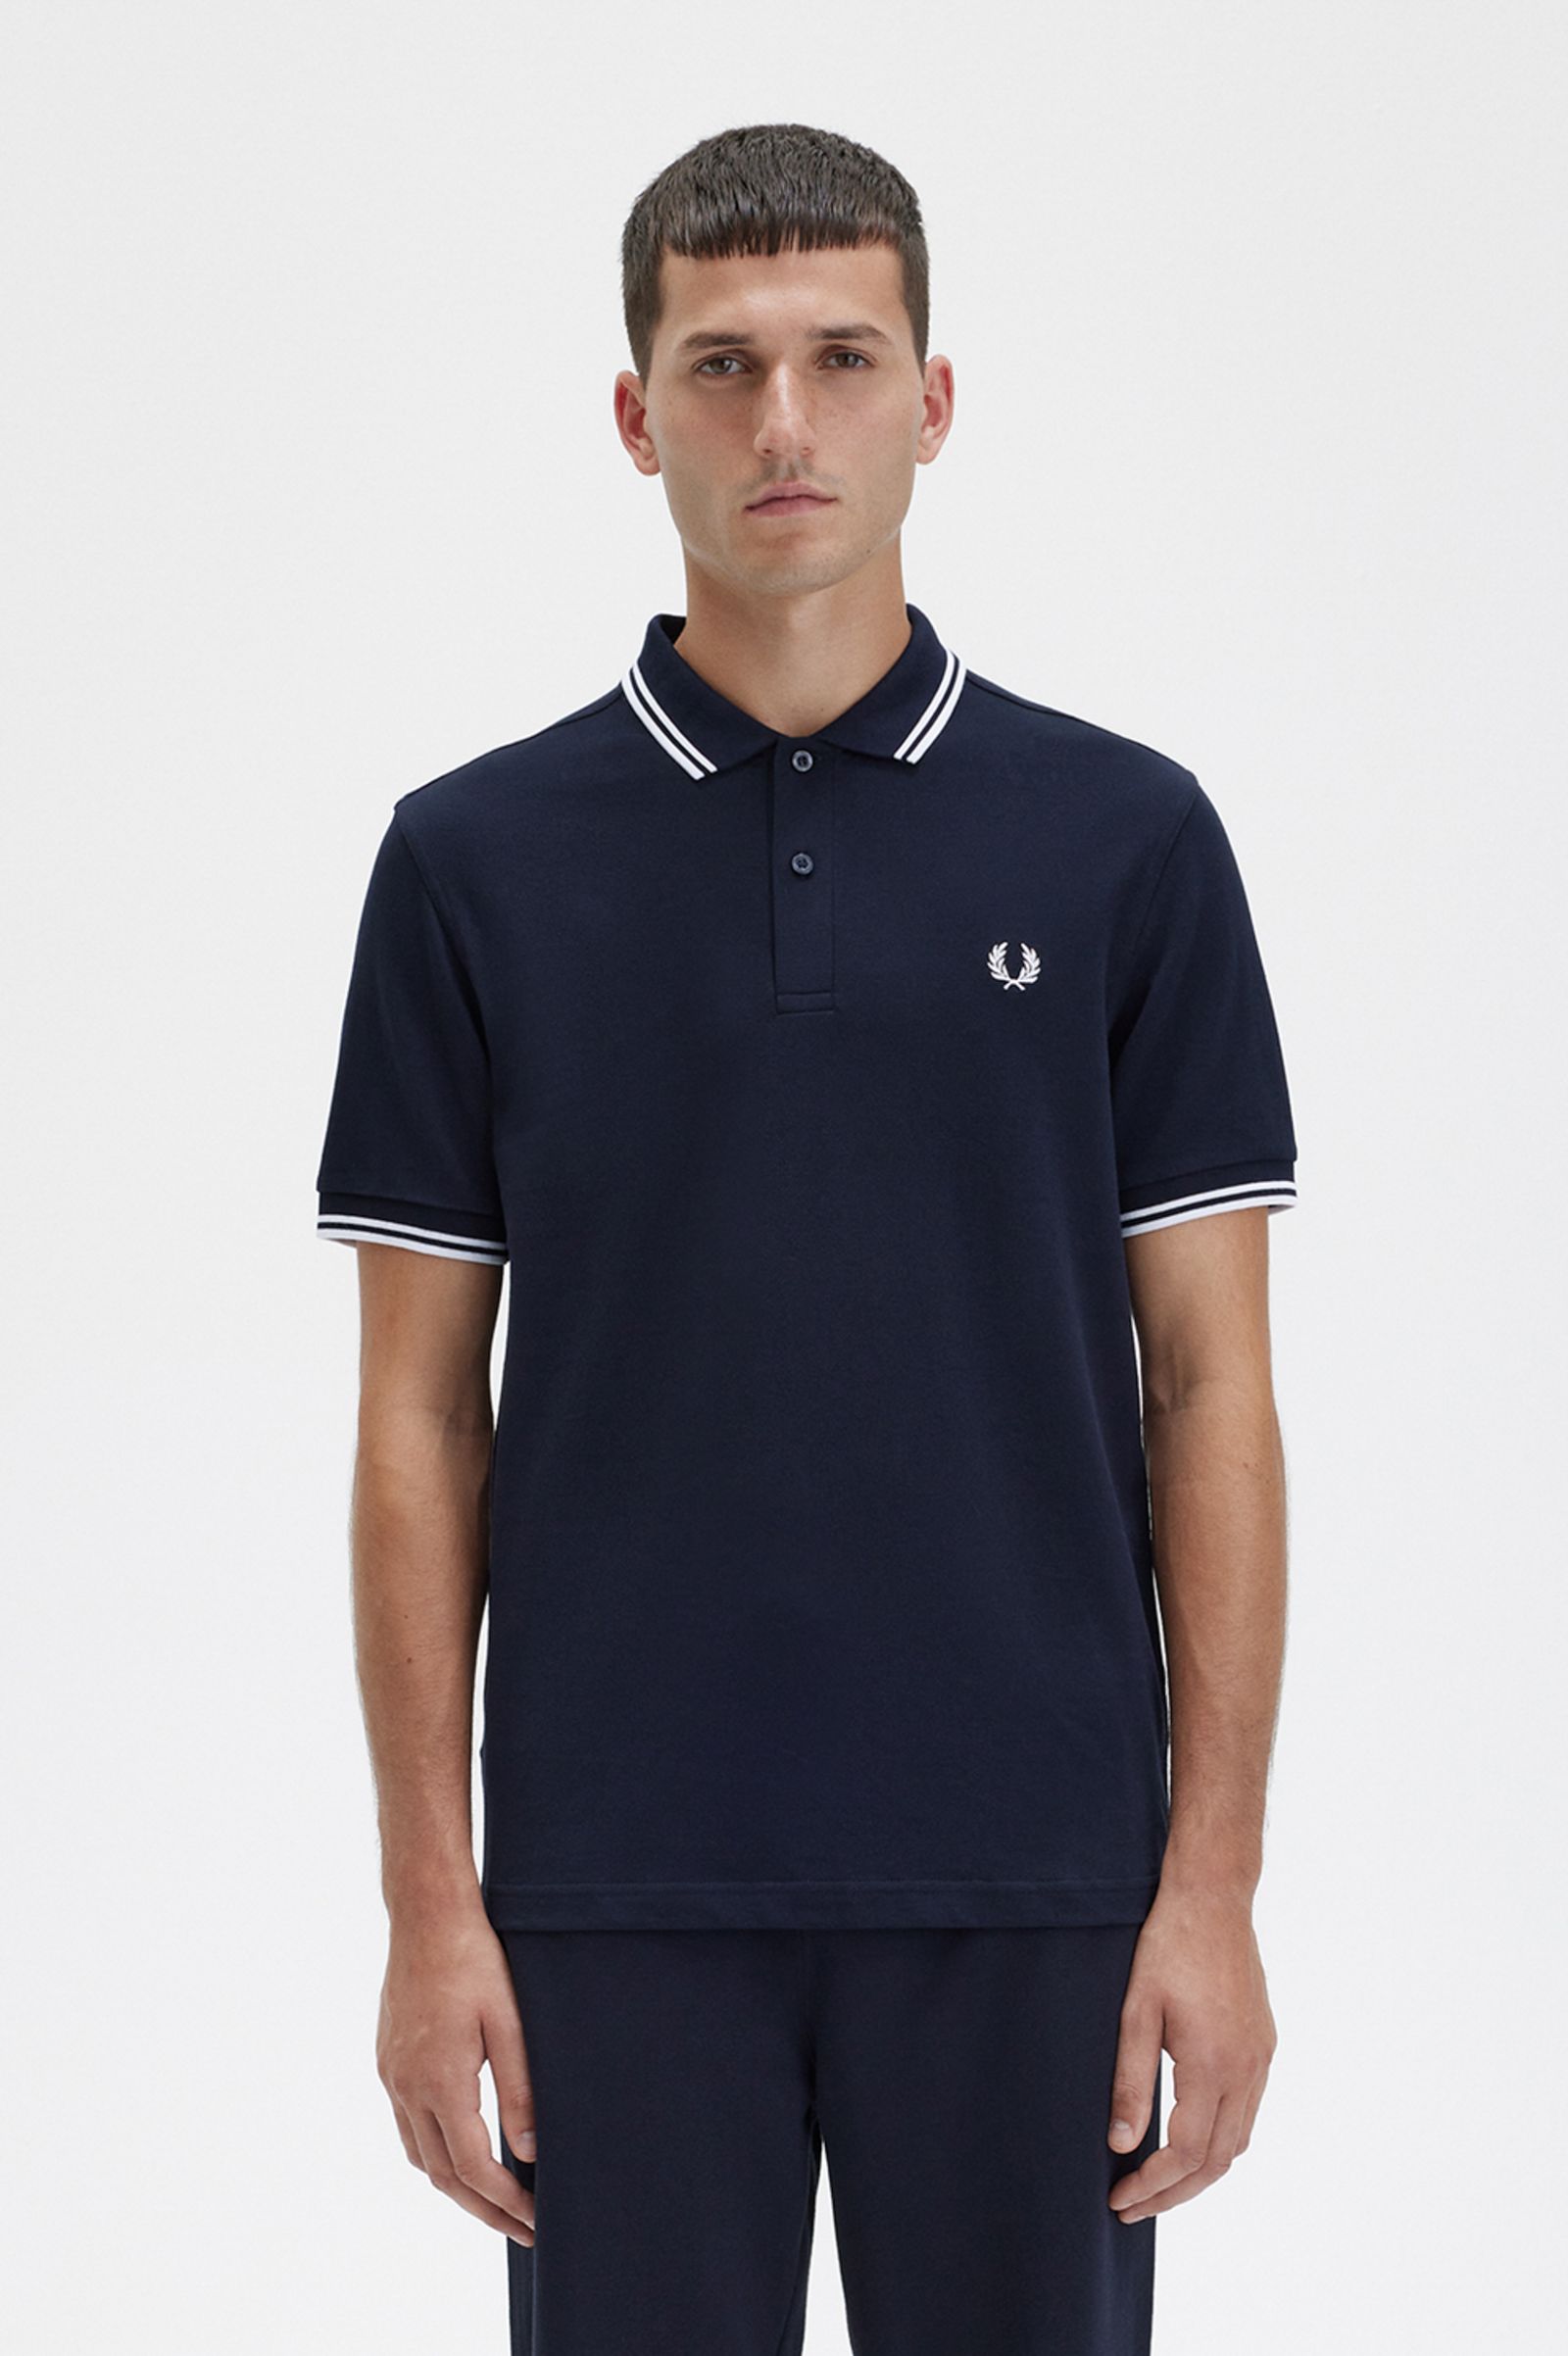 Anzai Koningin Leeuw M3600 - Navy / White / White | The Fred Perry Shirt | Men's Short & Long  Sleeve Polo Shirts | Fred Perry US